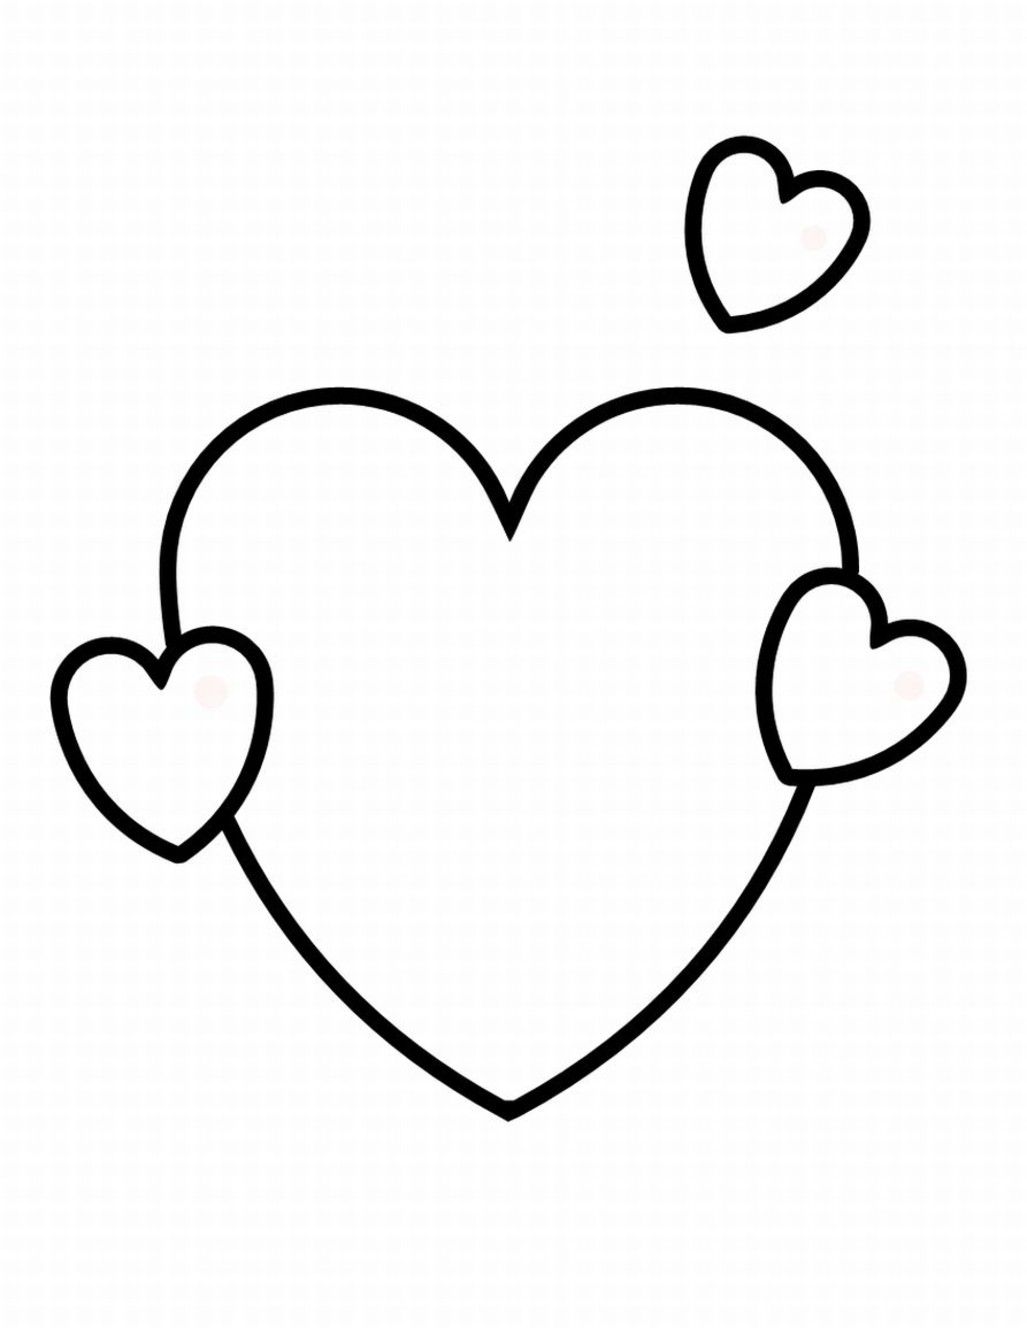 Heart With Wings Coloring Pages - ClipArt Best